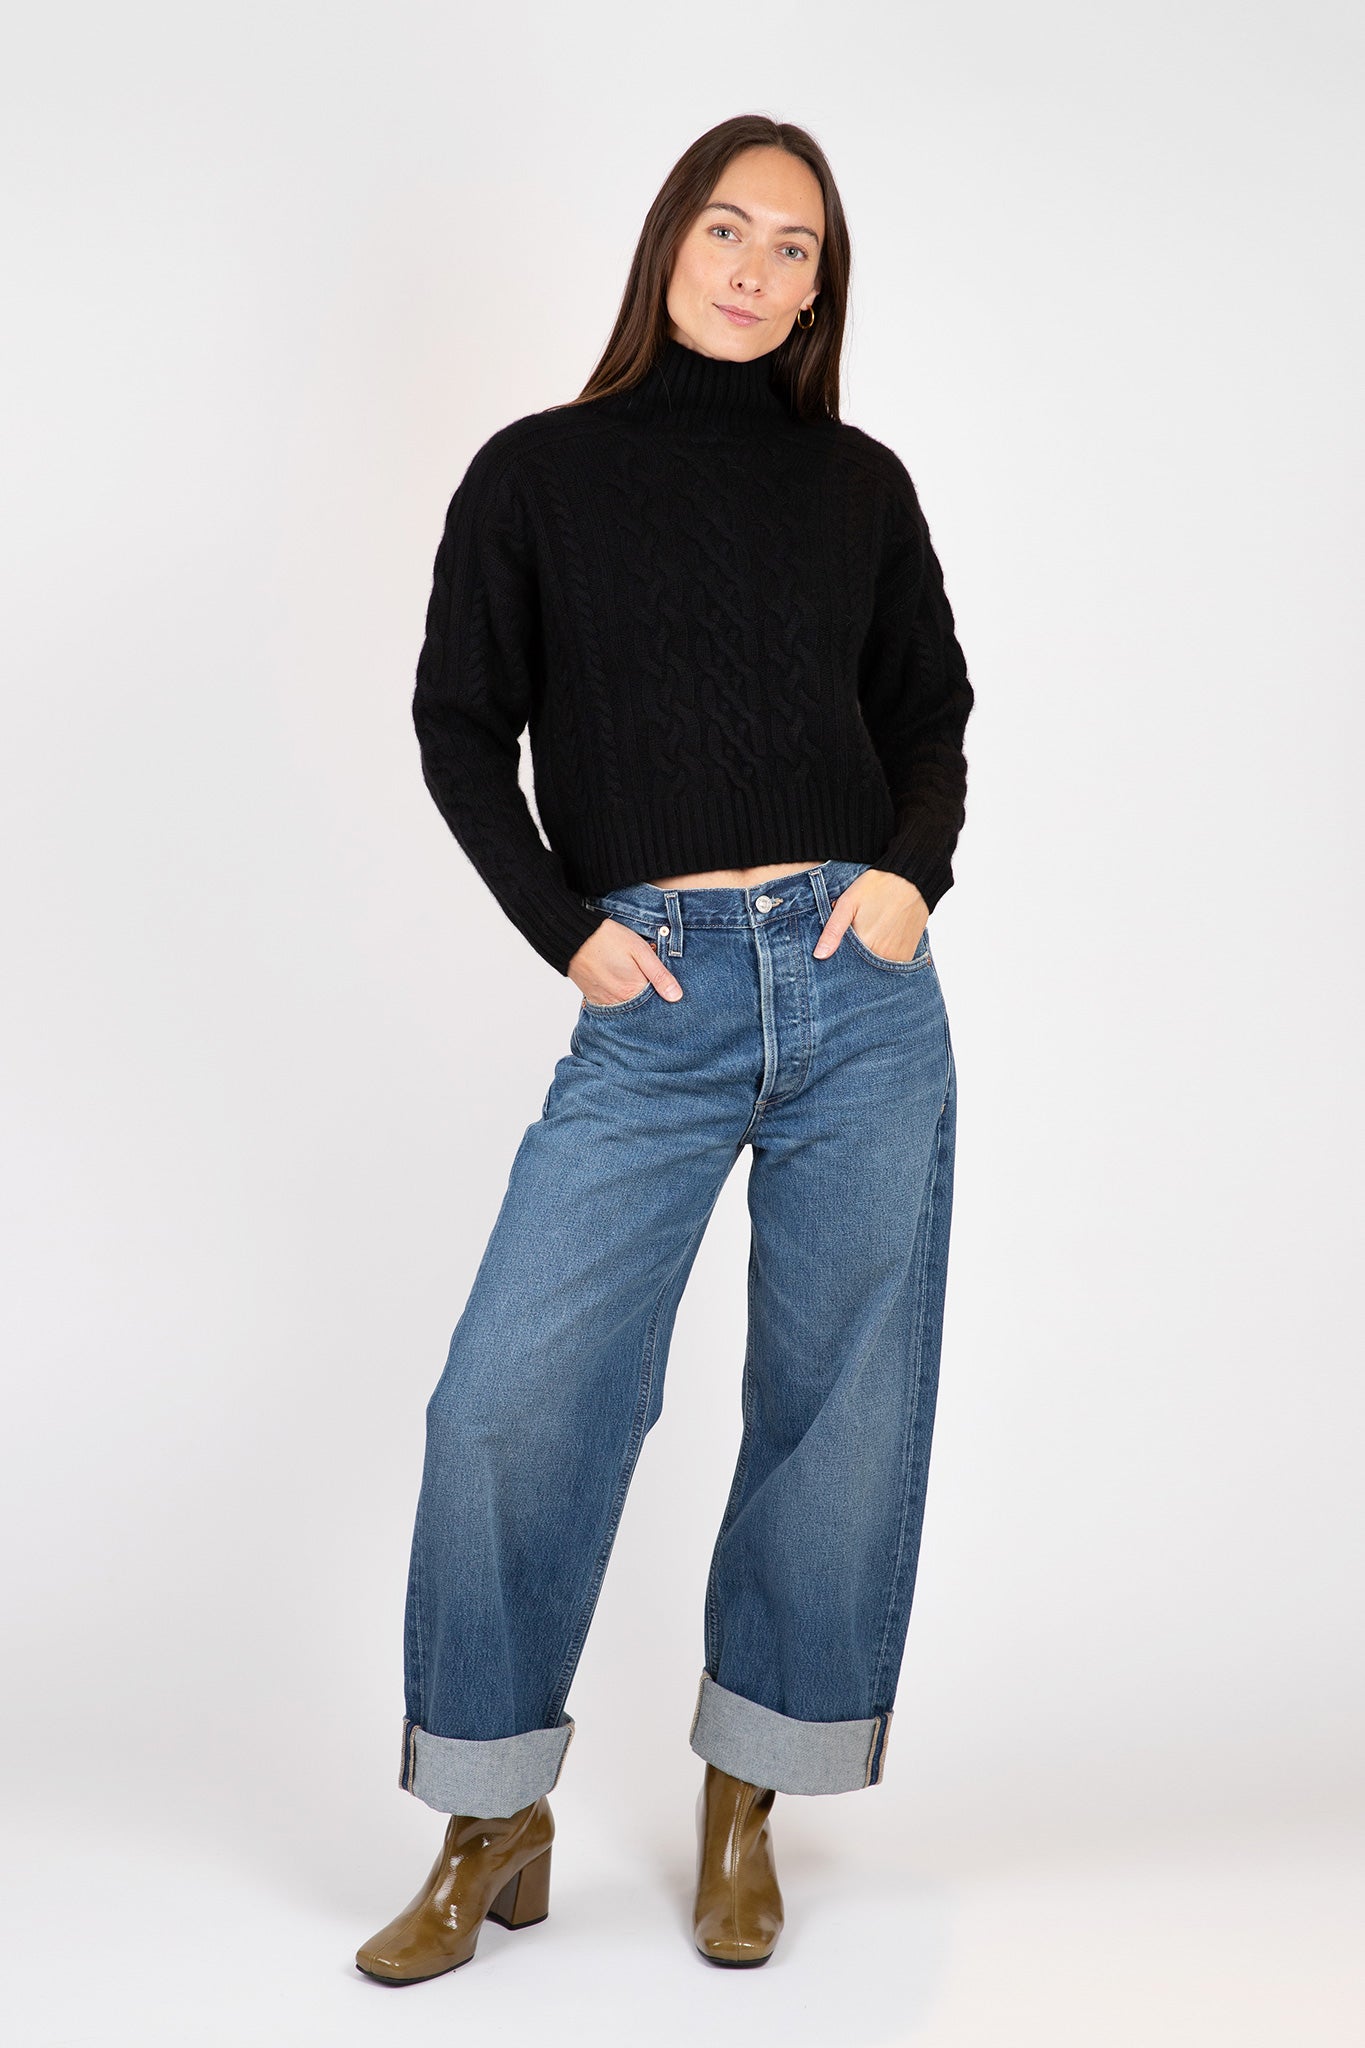 Cropped Cable Mockneck Sweaters & Knits Autumn Cashmere   